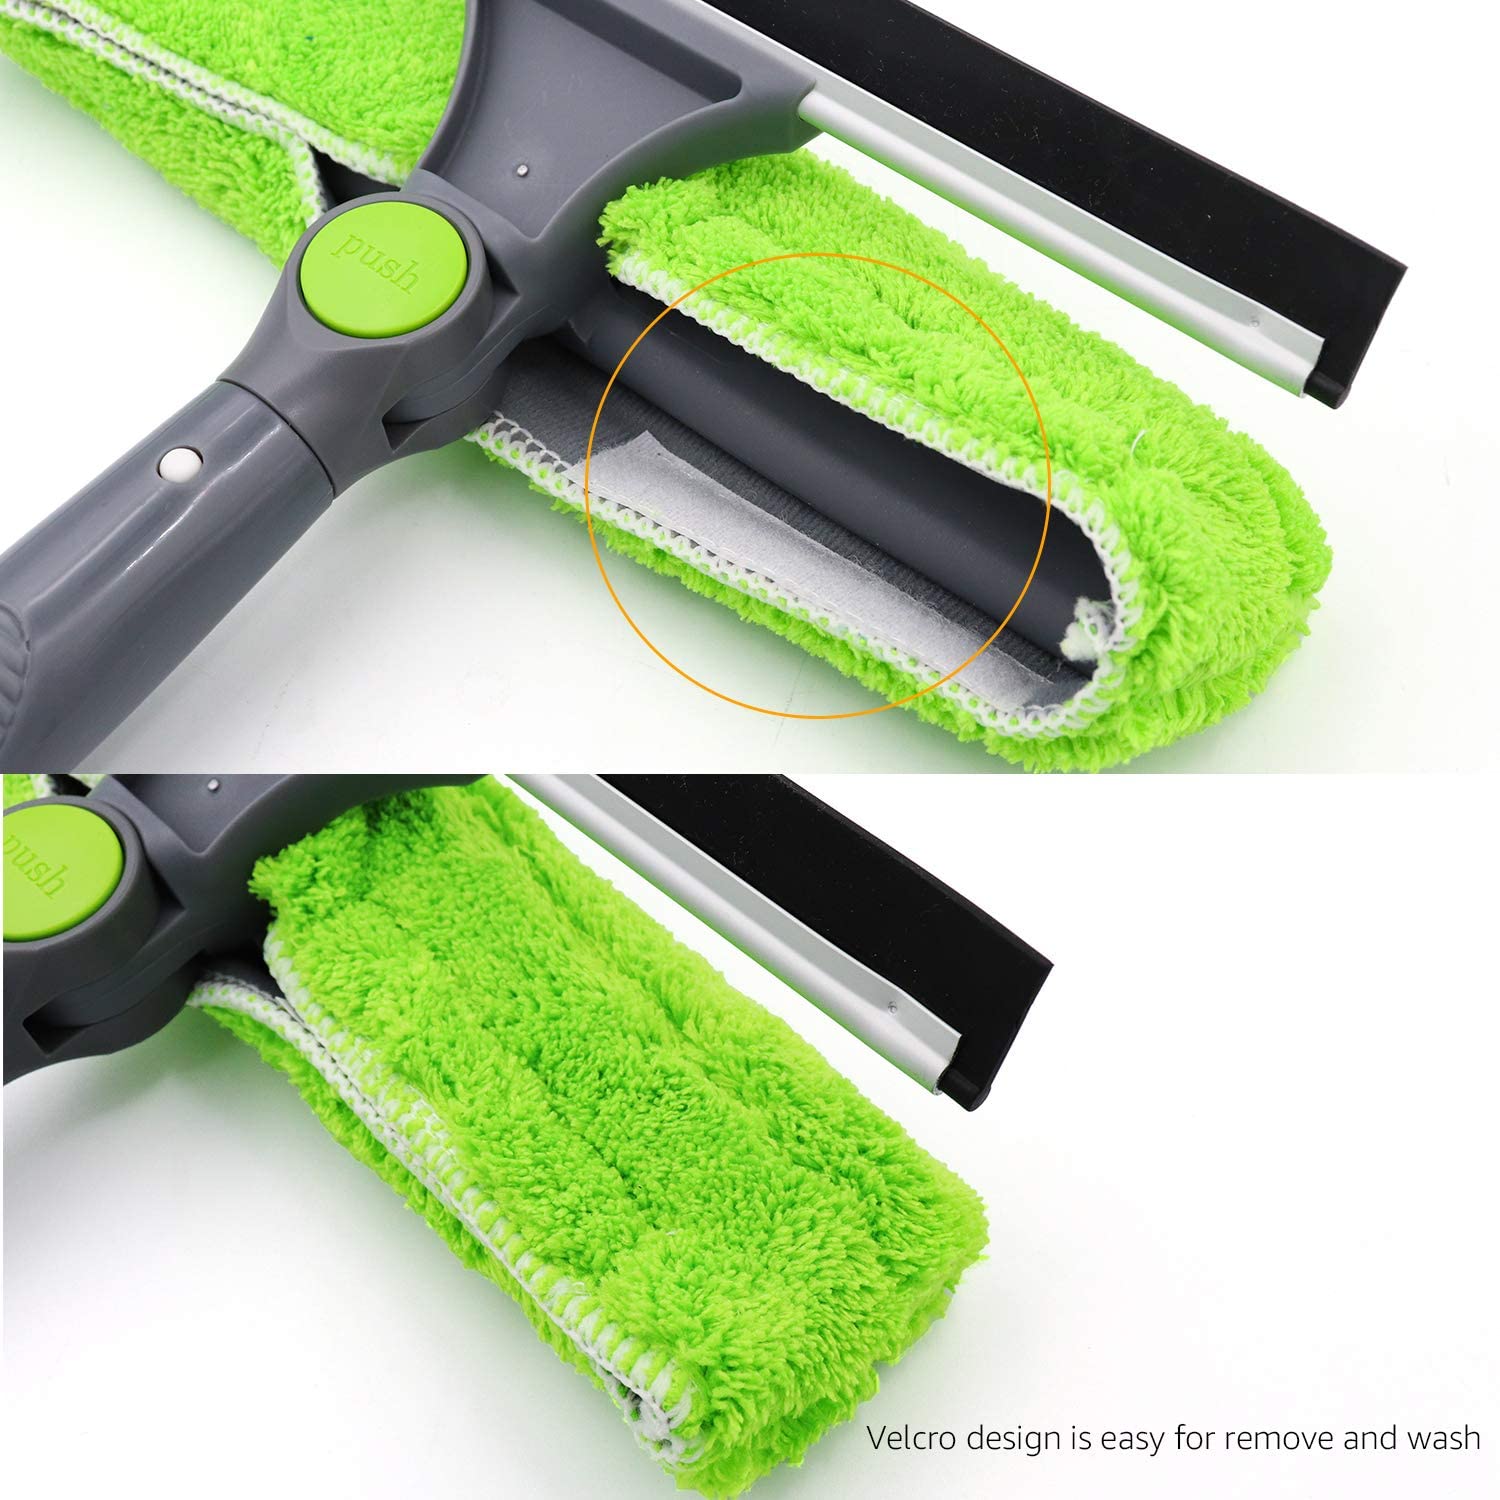 Amazon Basics Extendable Window Squeegee with Rotating Head